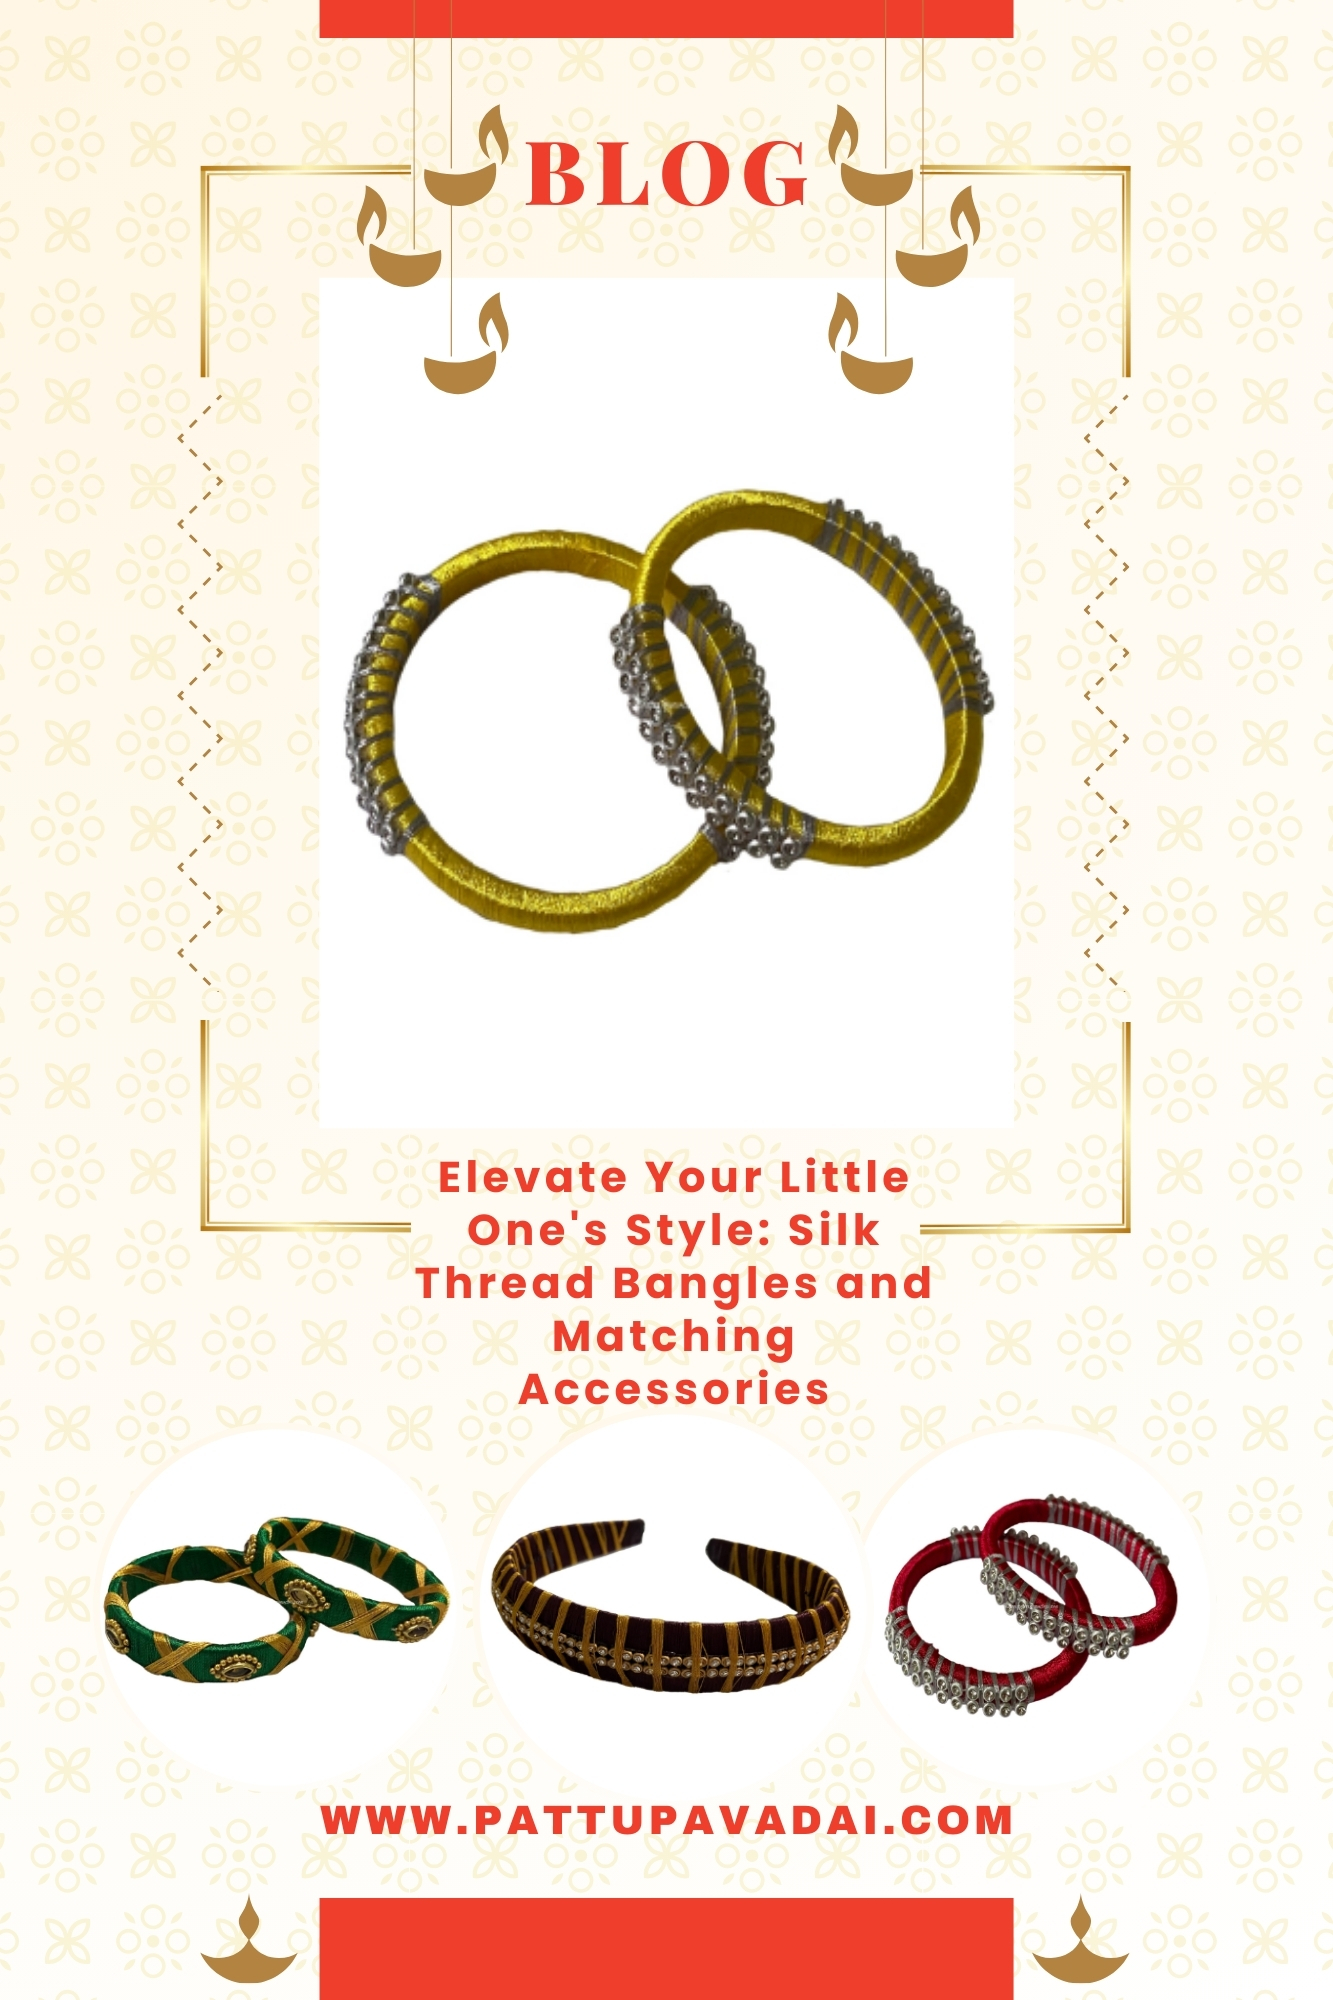 Elevate Your Little One's Style: Silk Thread Bangles and Matching Accessories